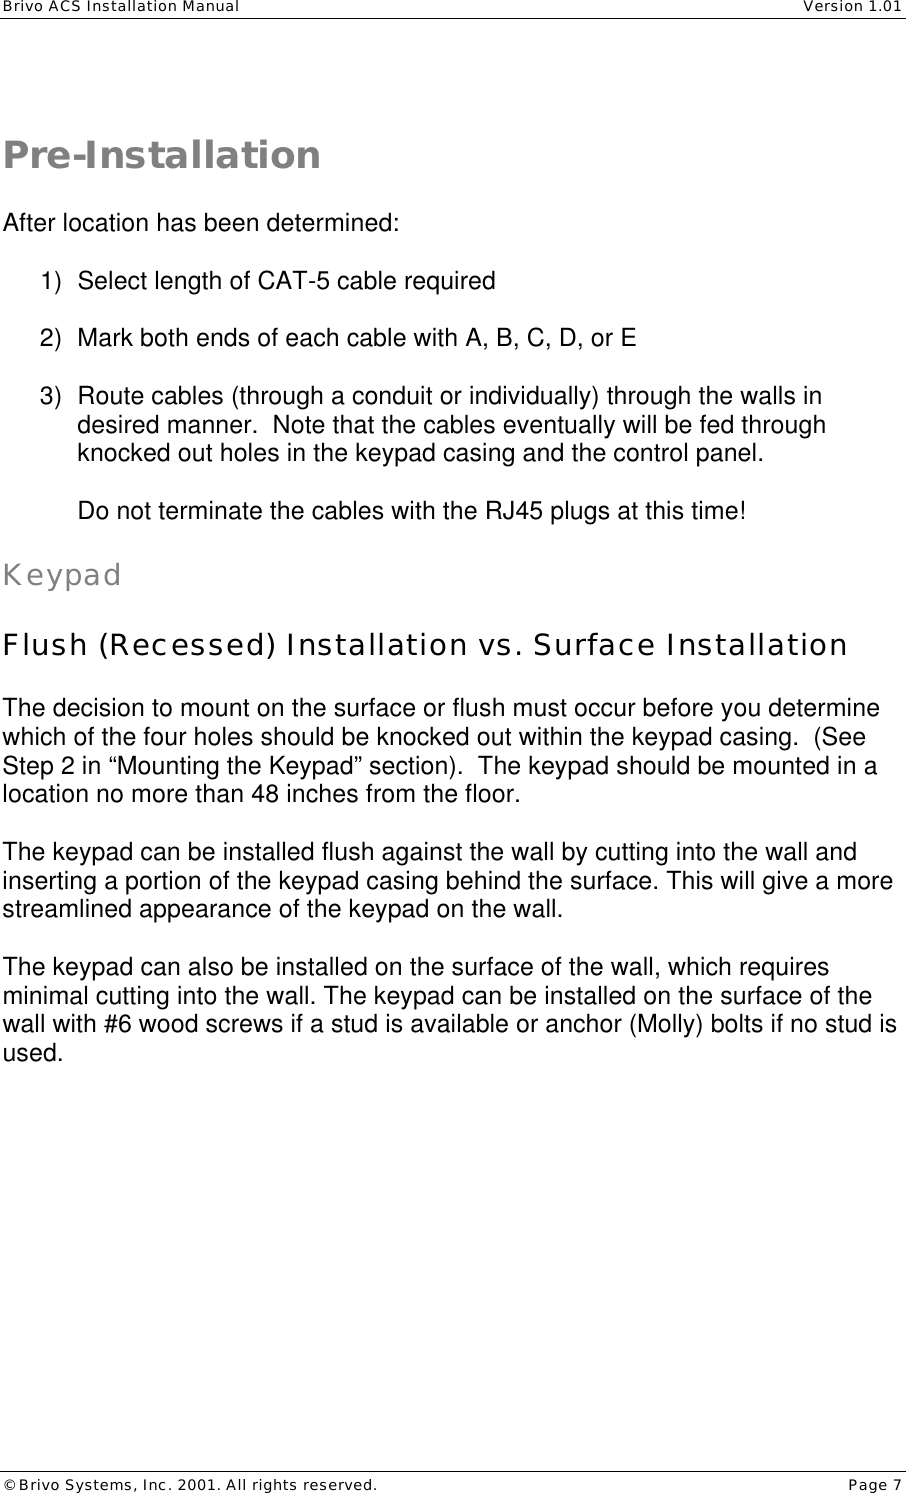 Brivo ACS Installation Manual    Version 1.01 © Brivo Systems, Inc. 2001. All rights reserved.    Page 7   Pre-Installation  After location has been determined:  1) Select length of CAT-5 cable required  2) Mark both ends of each cable with A, B, C, D, or E  3) Route cables (through a conduit or individually) through the walls in desired manner.  Note that the cables eventually will be fed through knocked out holes in the keypad casing and the control panel.  Do not terminate the cables with the RJ45 plugs at this time!  Keypad  Flush (Recessed) Installation vs. Surface Installation  The decision to mount on the surface or flush must occur before you determine which of the four holes should be knocked out within the keypad casing.  (See Step 2 in “Mounting the Keypad” section).  The keypad should be mounted in a location no more than 48 inches from the floor.  The keypad can be installed flush against the wall by cutting into the wall and inserting a portion of the keypad casing behind the surface. This will give a more streamlined appearance of the keypad on the wall.  The keypad can also be installed on the surface of the wall, which requires minimal cutting into the wall. The keypad can be installed on the surface of the wall with #6 wood screws if a stud is available or anchor (Molly) bolts if no stud is used.  